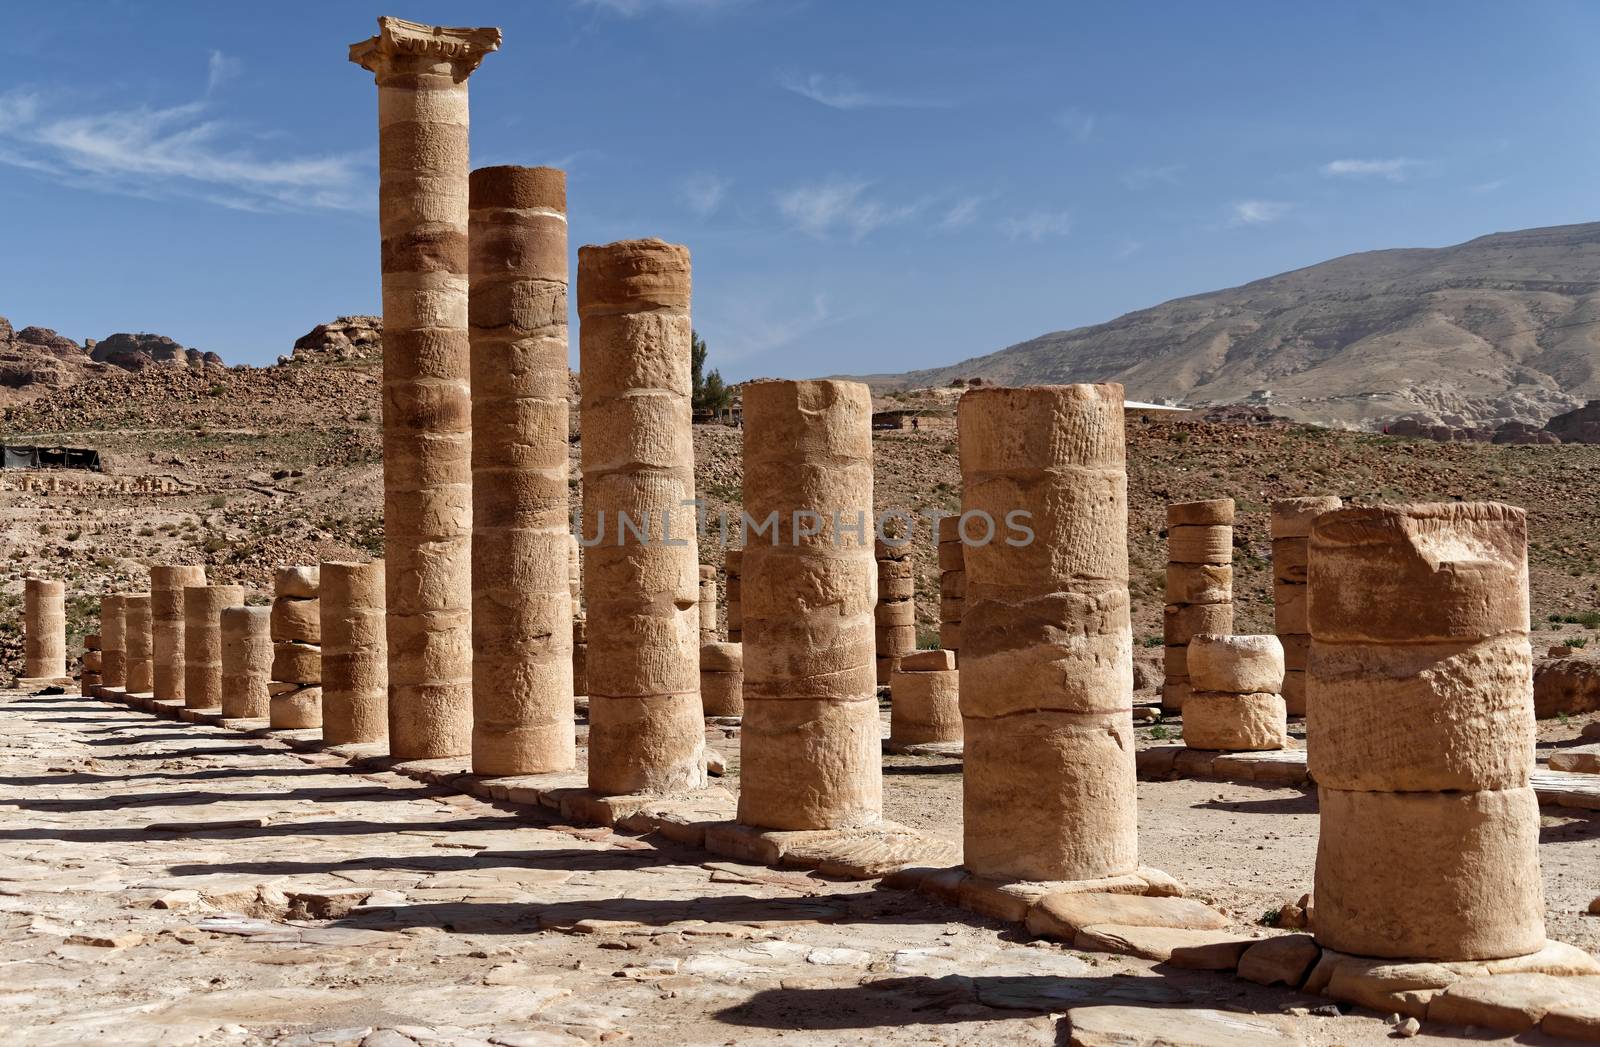 Pillars of the Romans in the Necropolis of Petra, Jordan, middle east